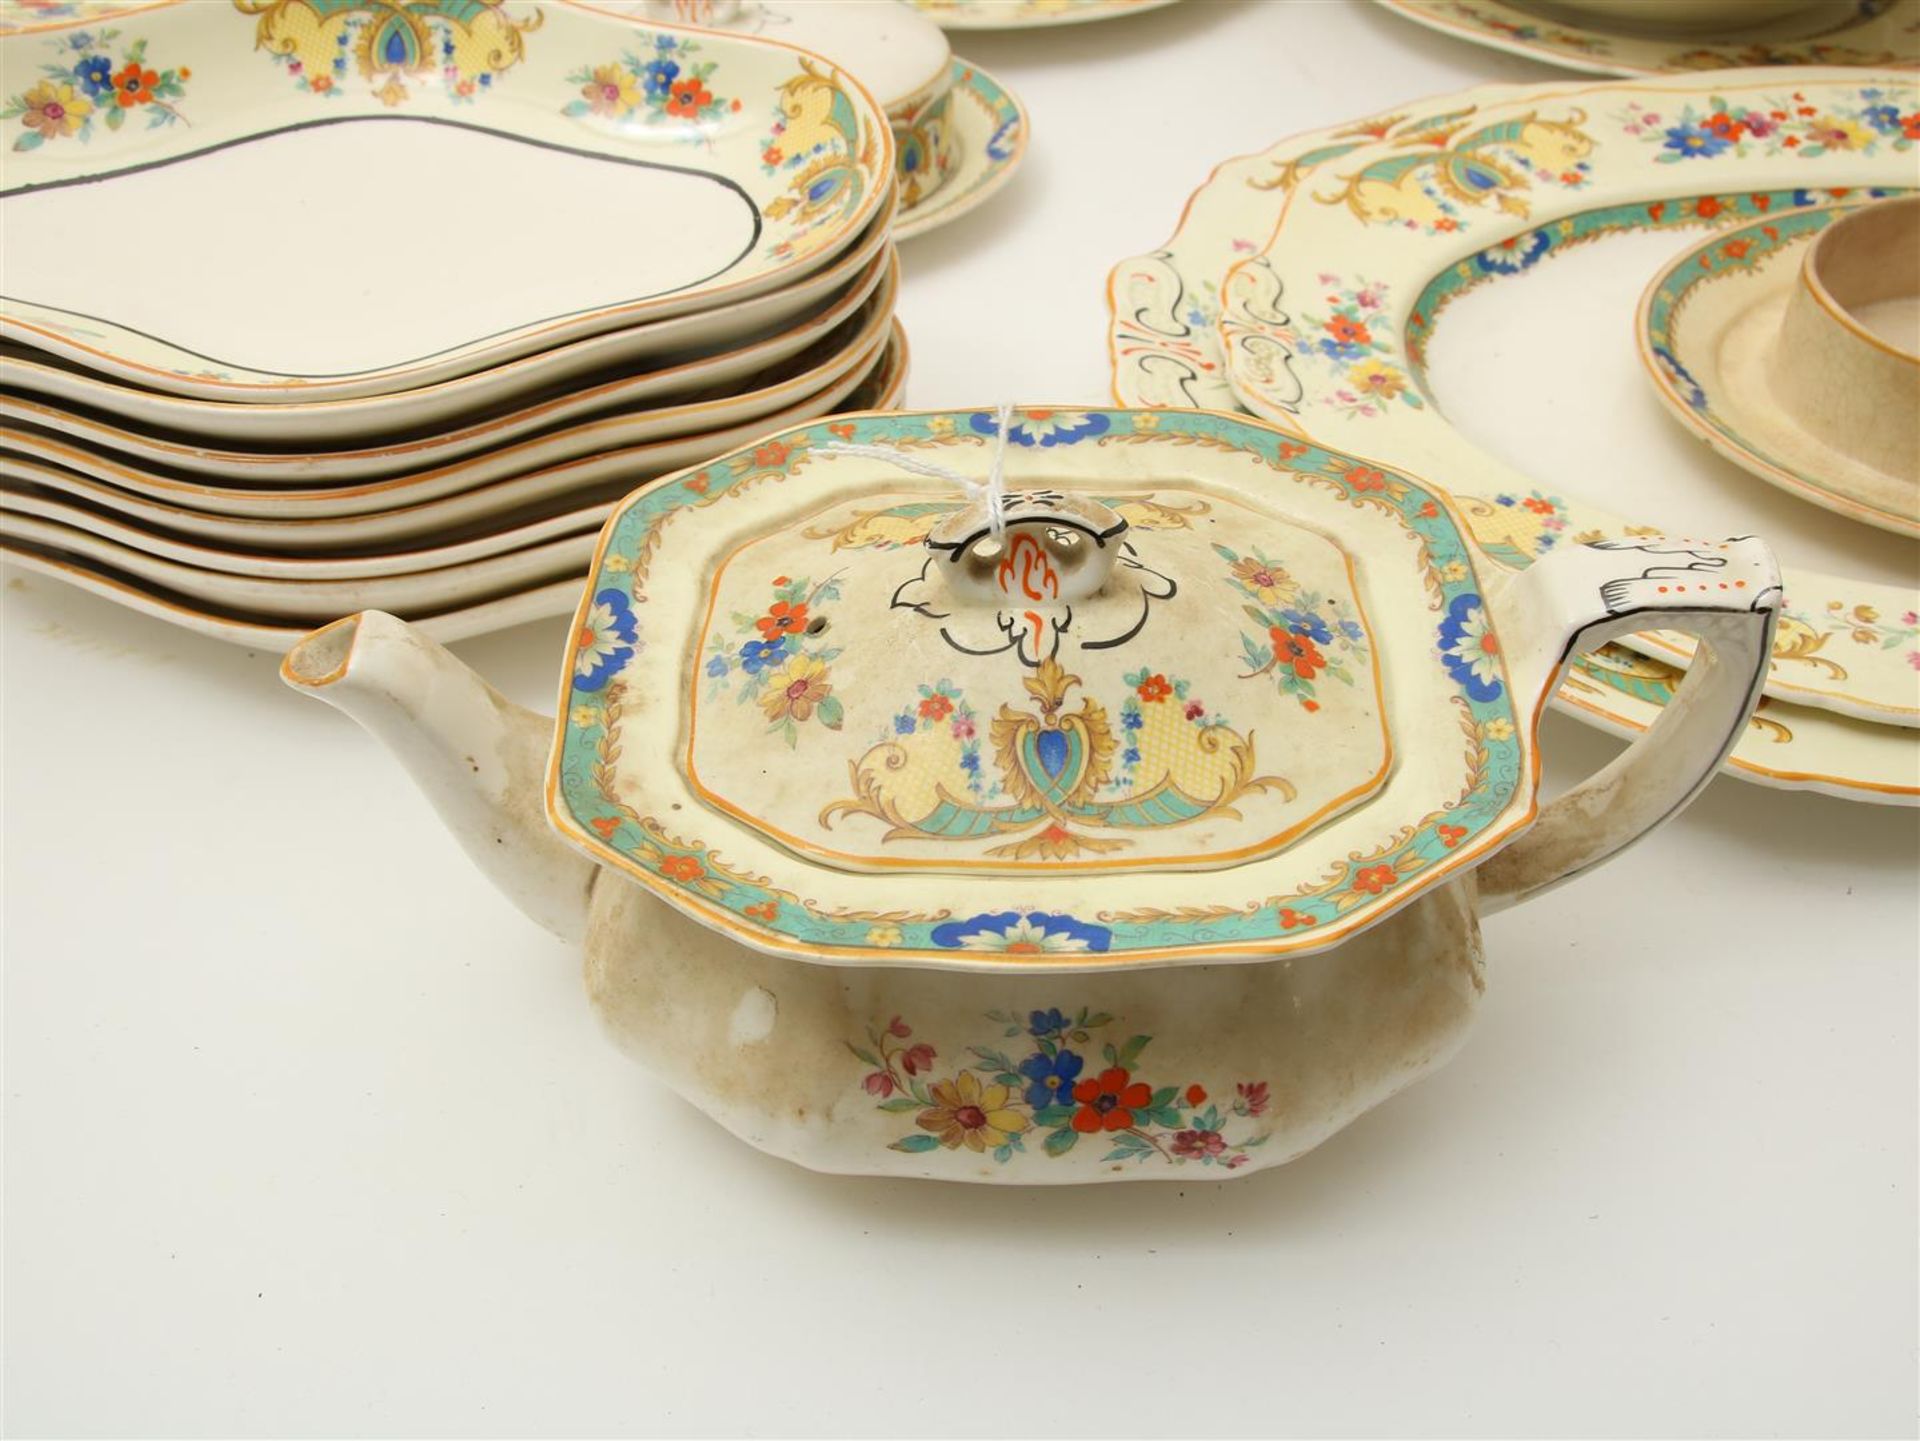 80 pieces of earthenware tableware with floral decorations, marked Alfred Meakin England, model - Image 3 of 8